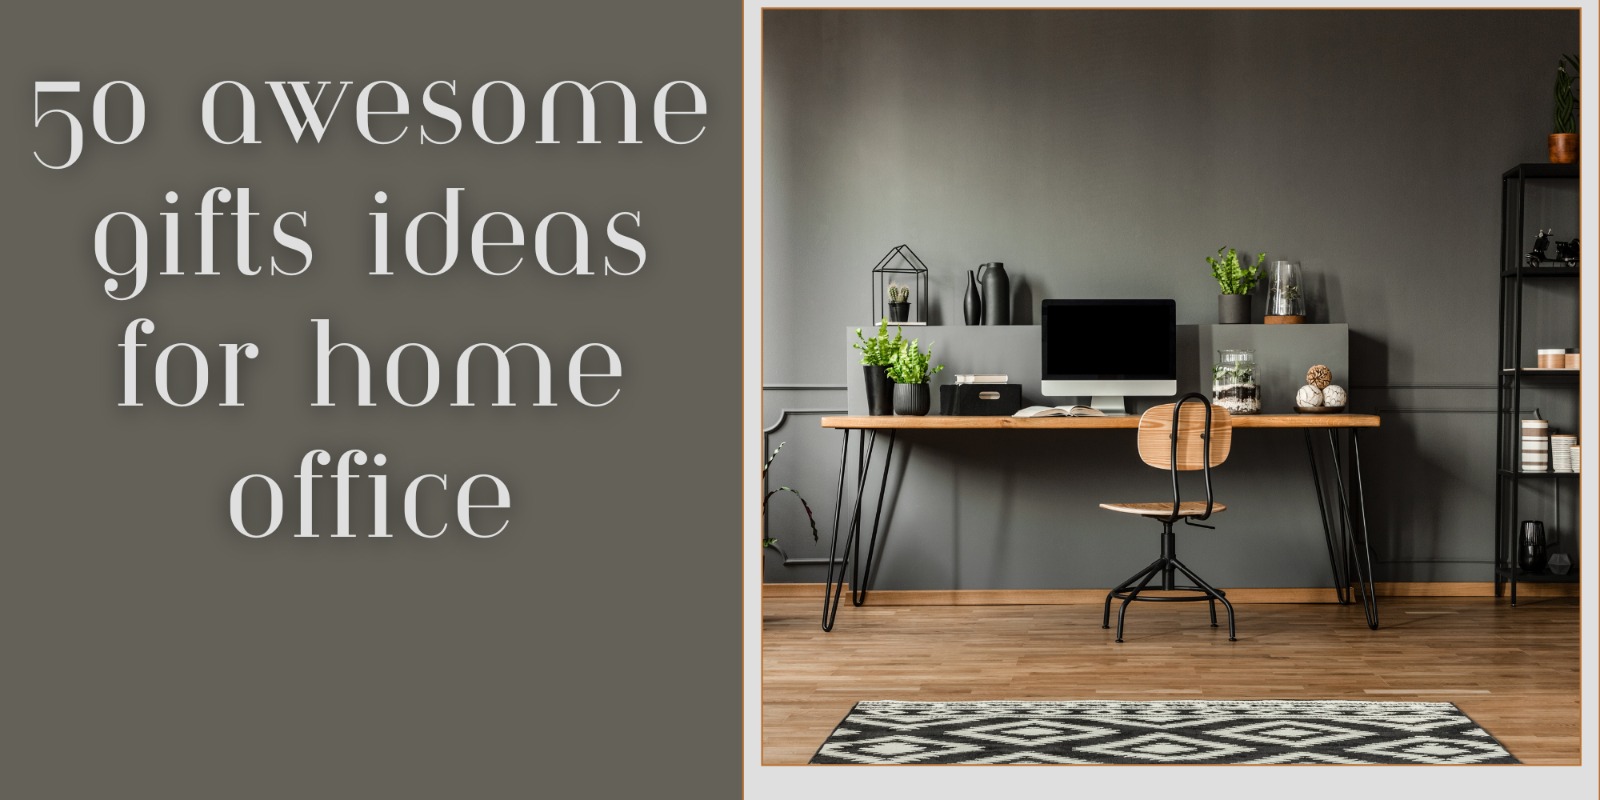 50 Awesome Gifts Ideas for Home Office